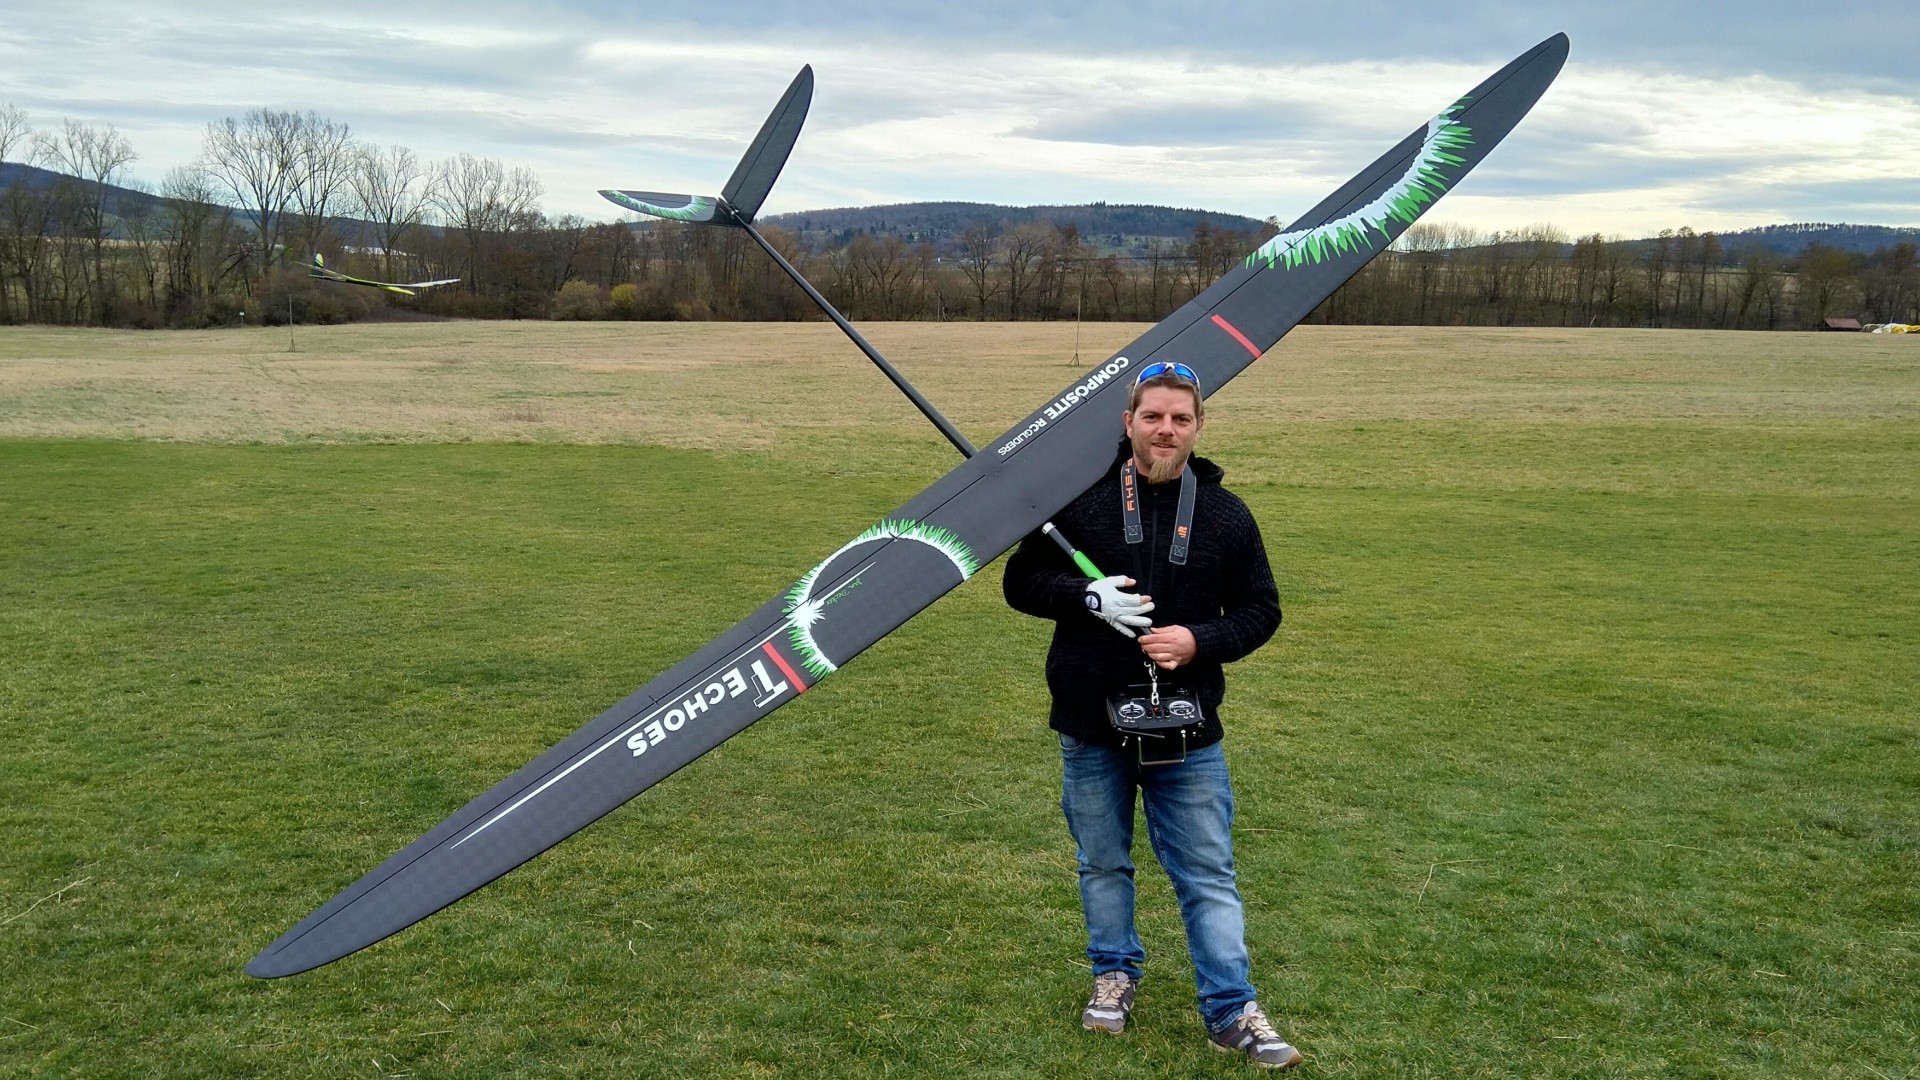 Echoes TT (Composite RC Gliders)